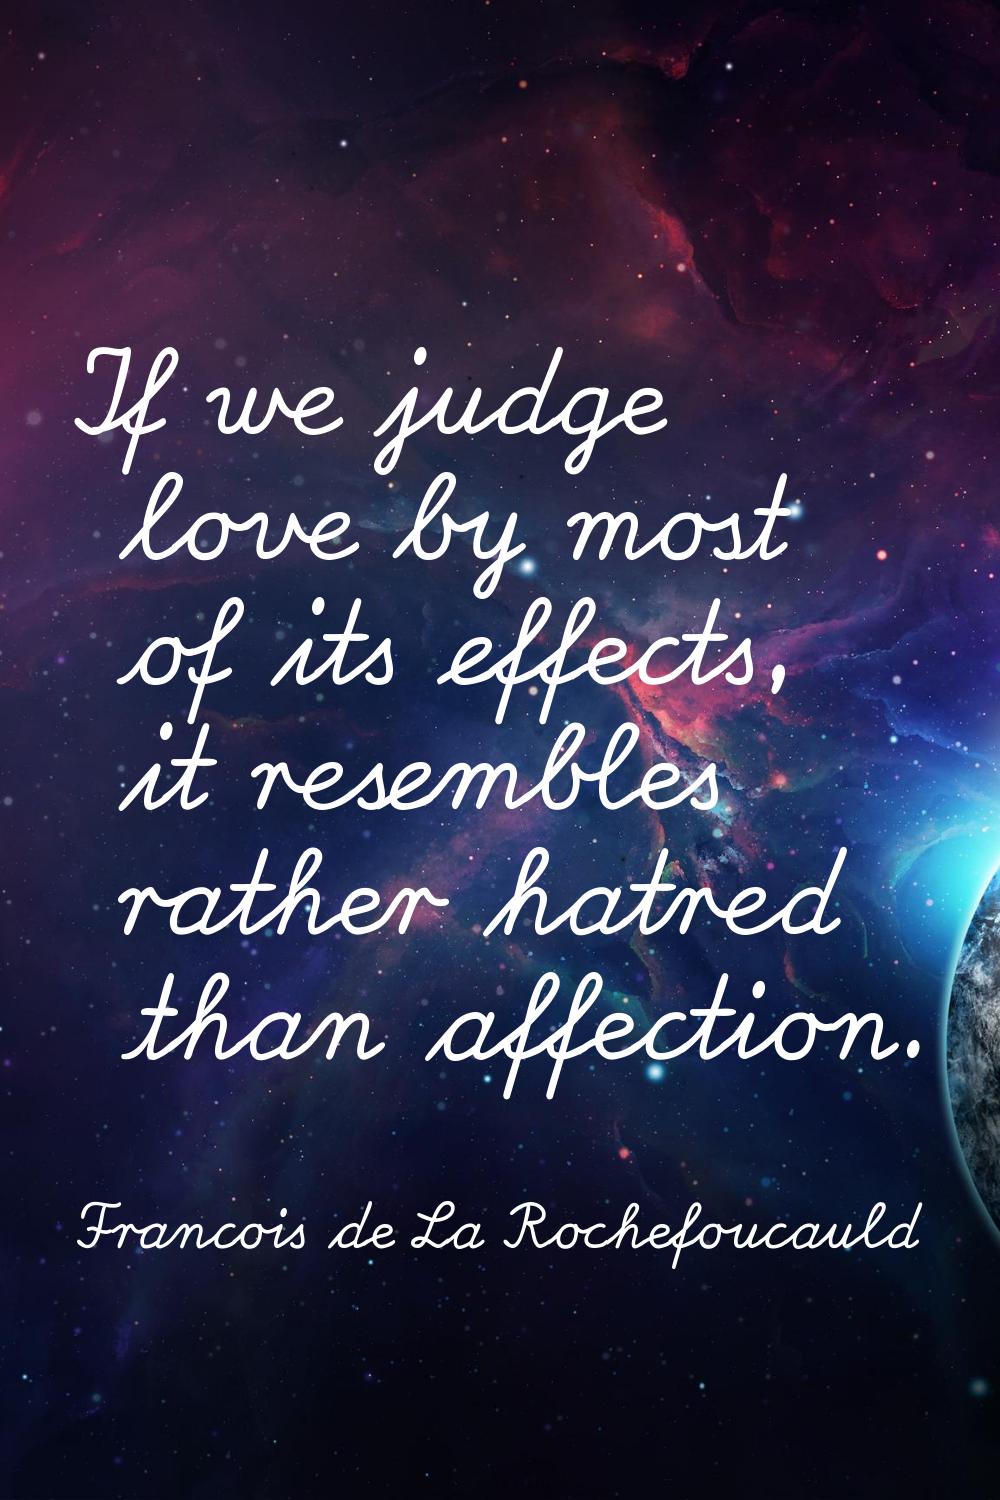 If we judge love by most of its effects, it resembles rather hatred than affection.